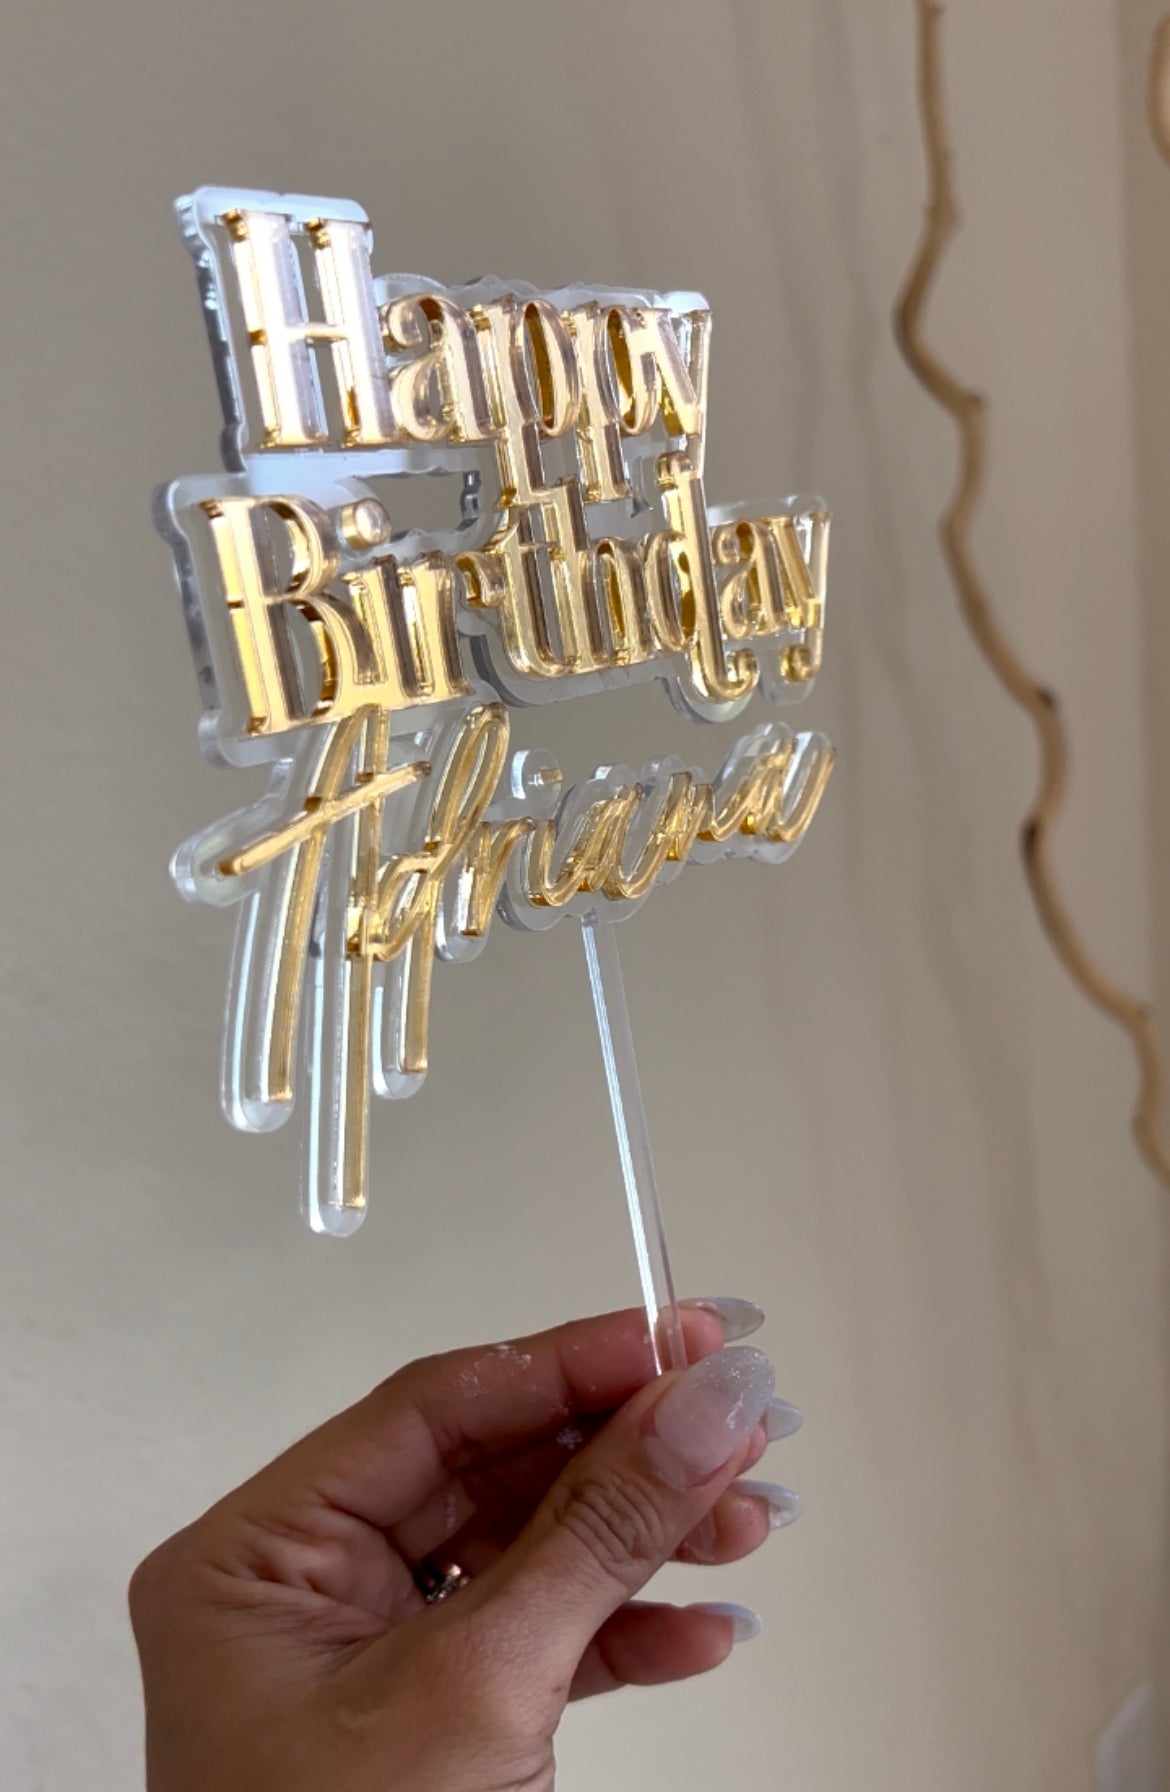 Happy Birthday Cake Toppers,double Sided Acrylic Mirror Gold Cake